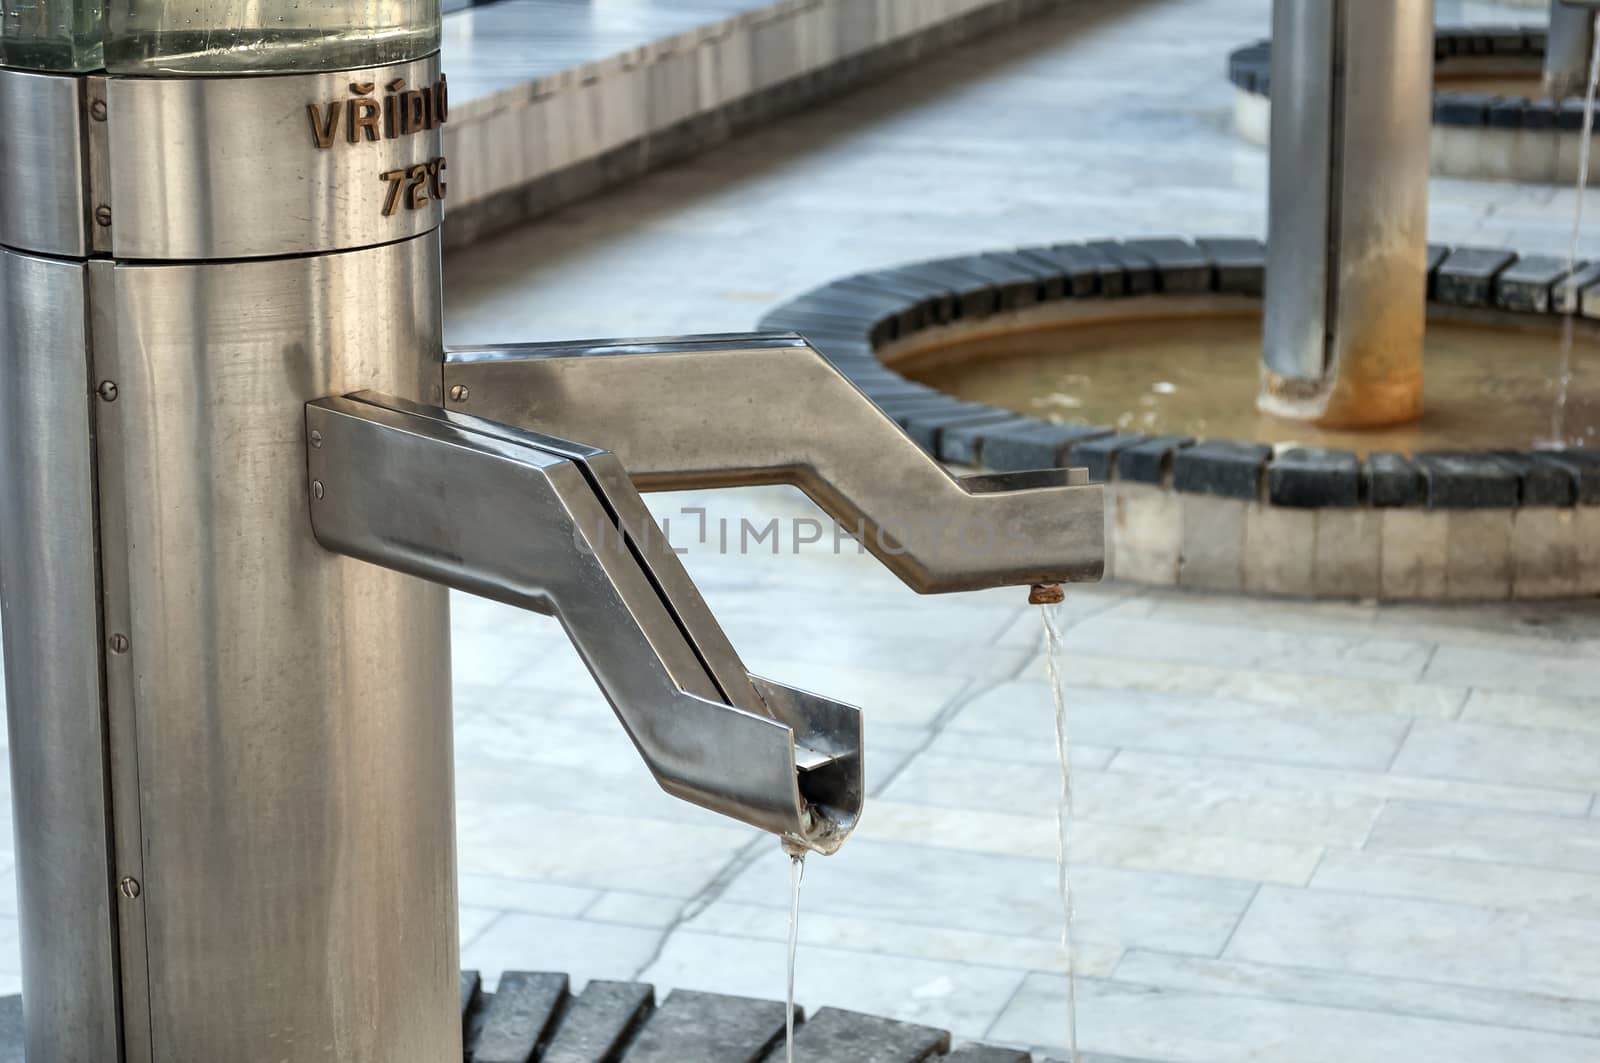 Hot spring water in the spa town of Karlovy vary, Czech Republic.